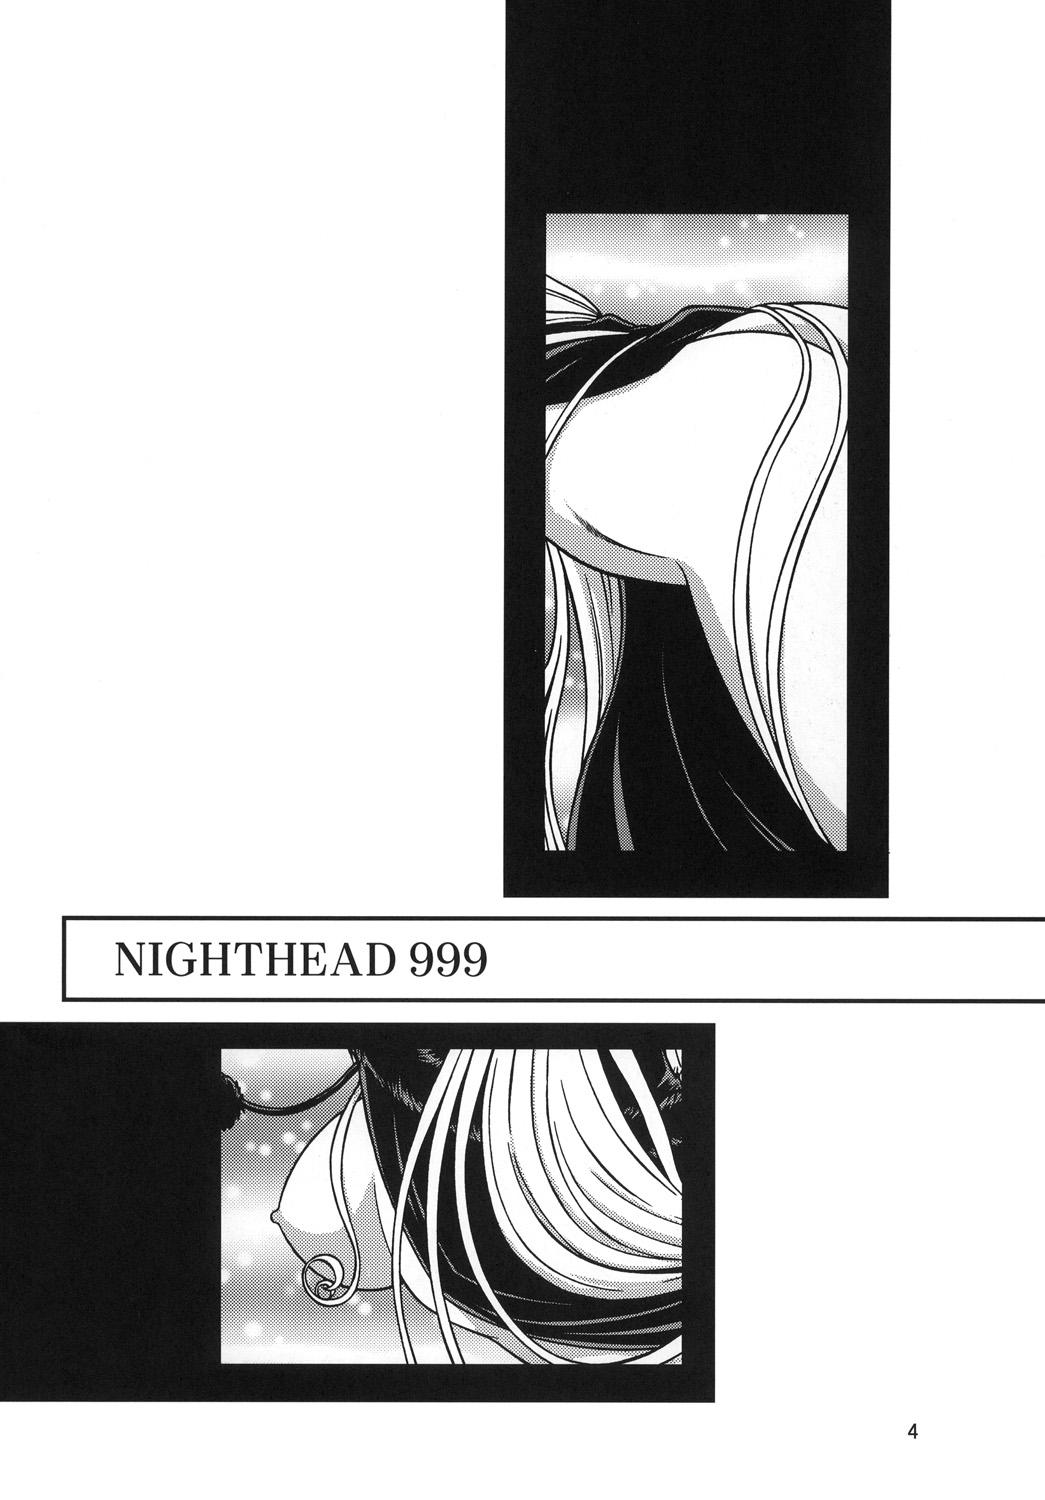 Tamil NIGHTHEAD＋ - Galaxy express 999 Space pirate captain harlock Gay Group - Page 3